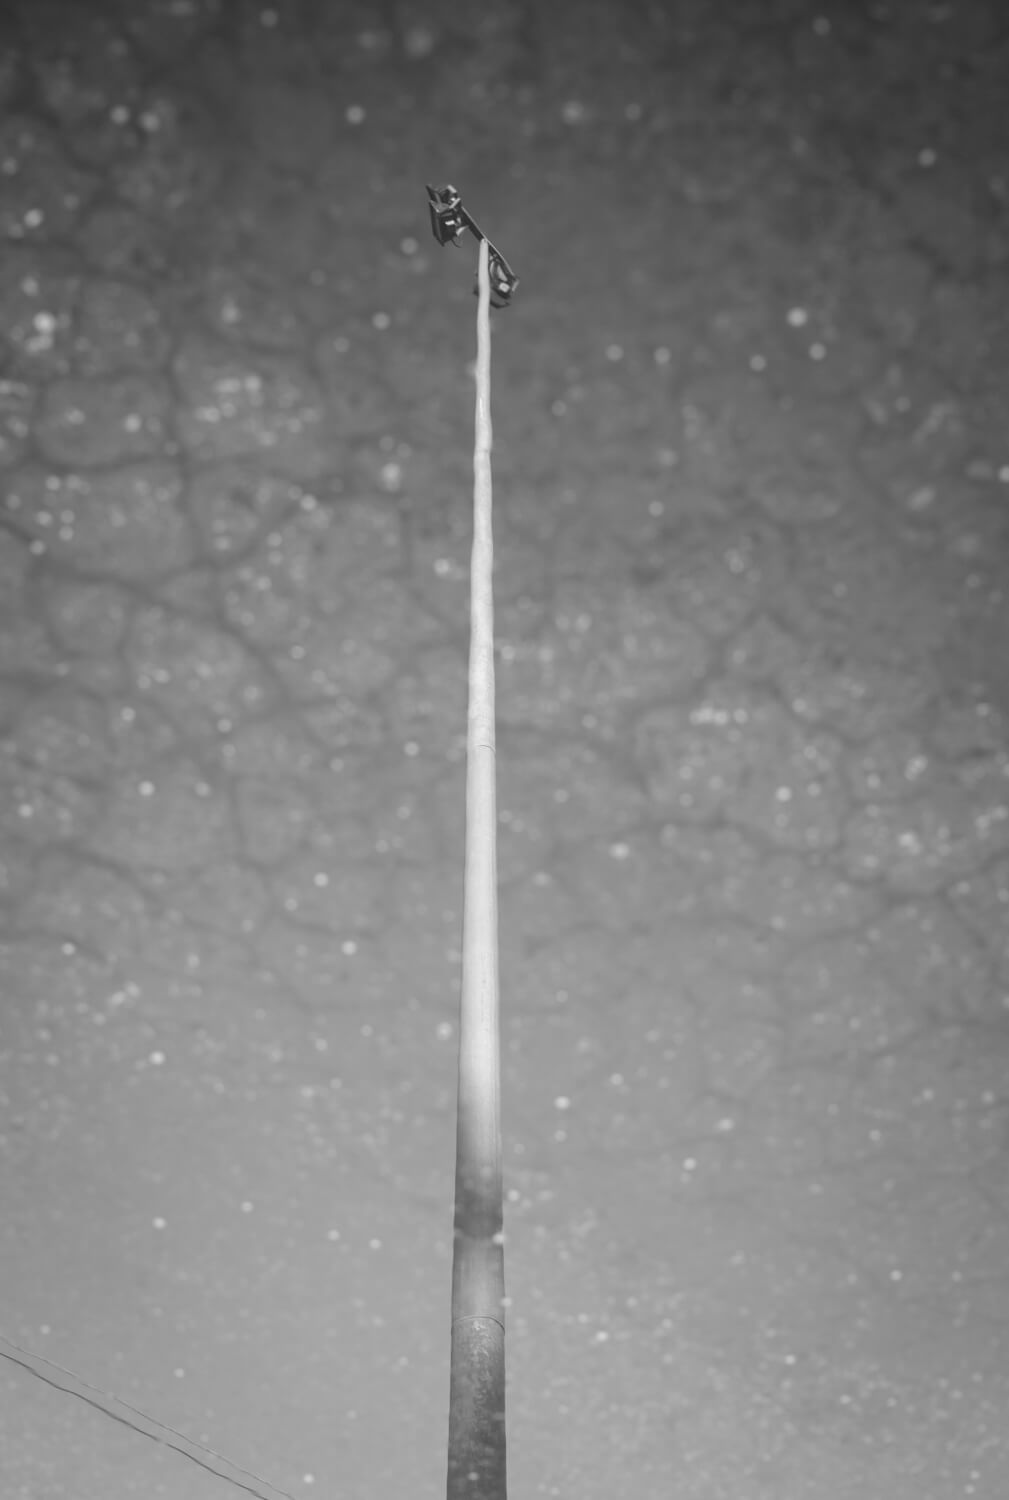 LSD trip pole. taken in a puddle on bitumen. Yet it looks like a sci-fi vision of poleness in the future.